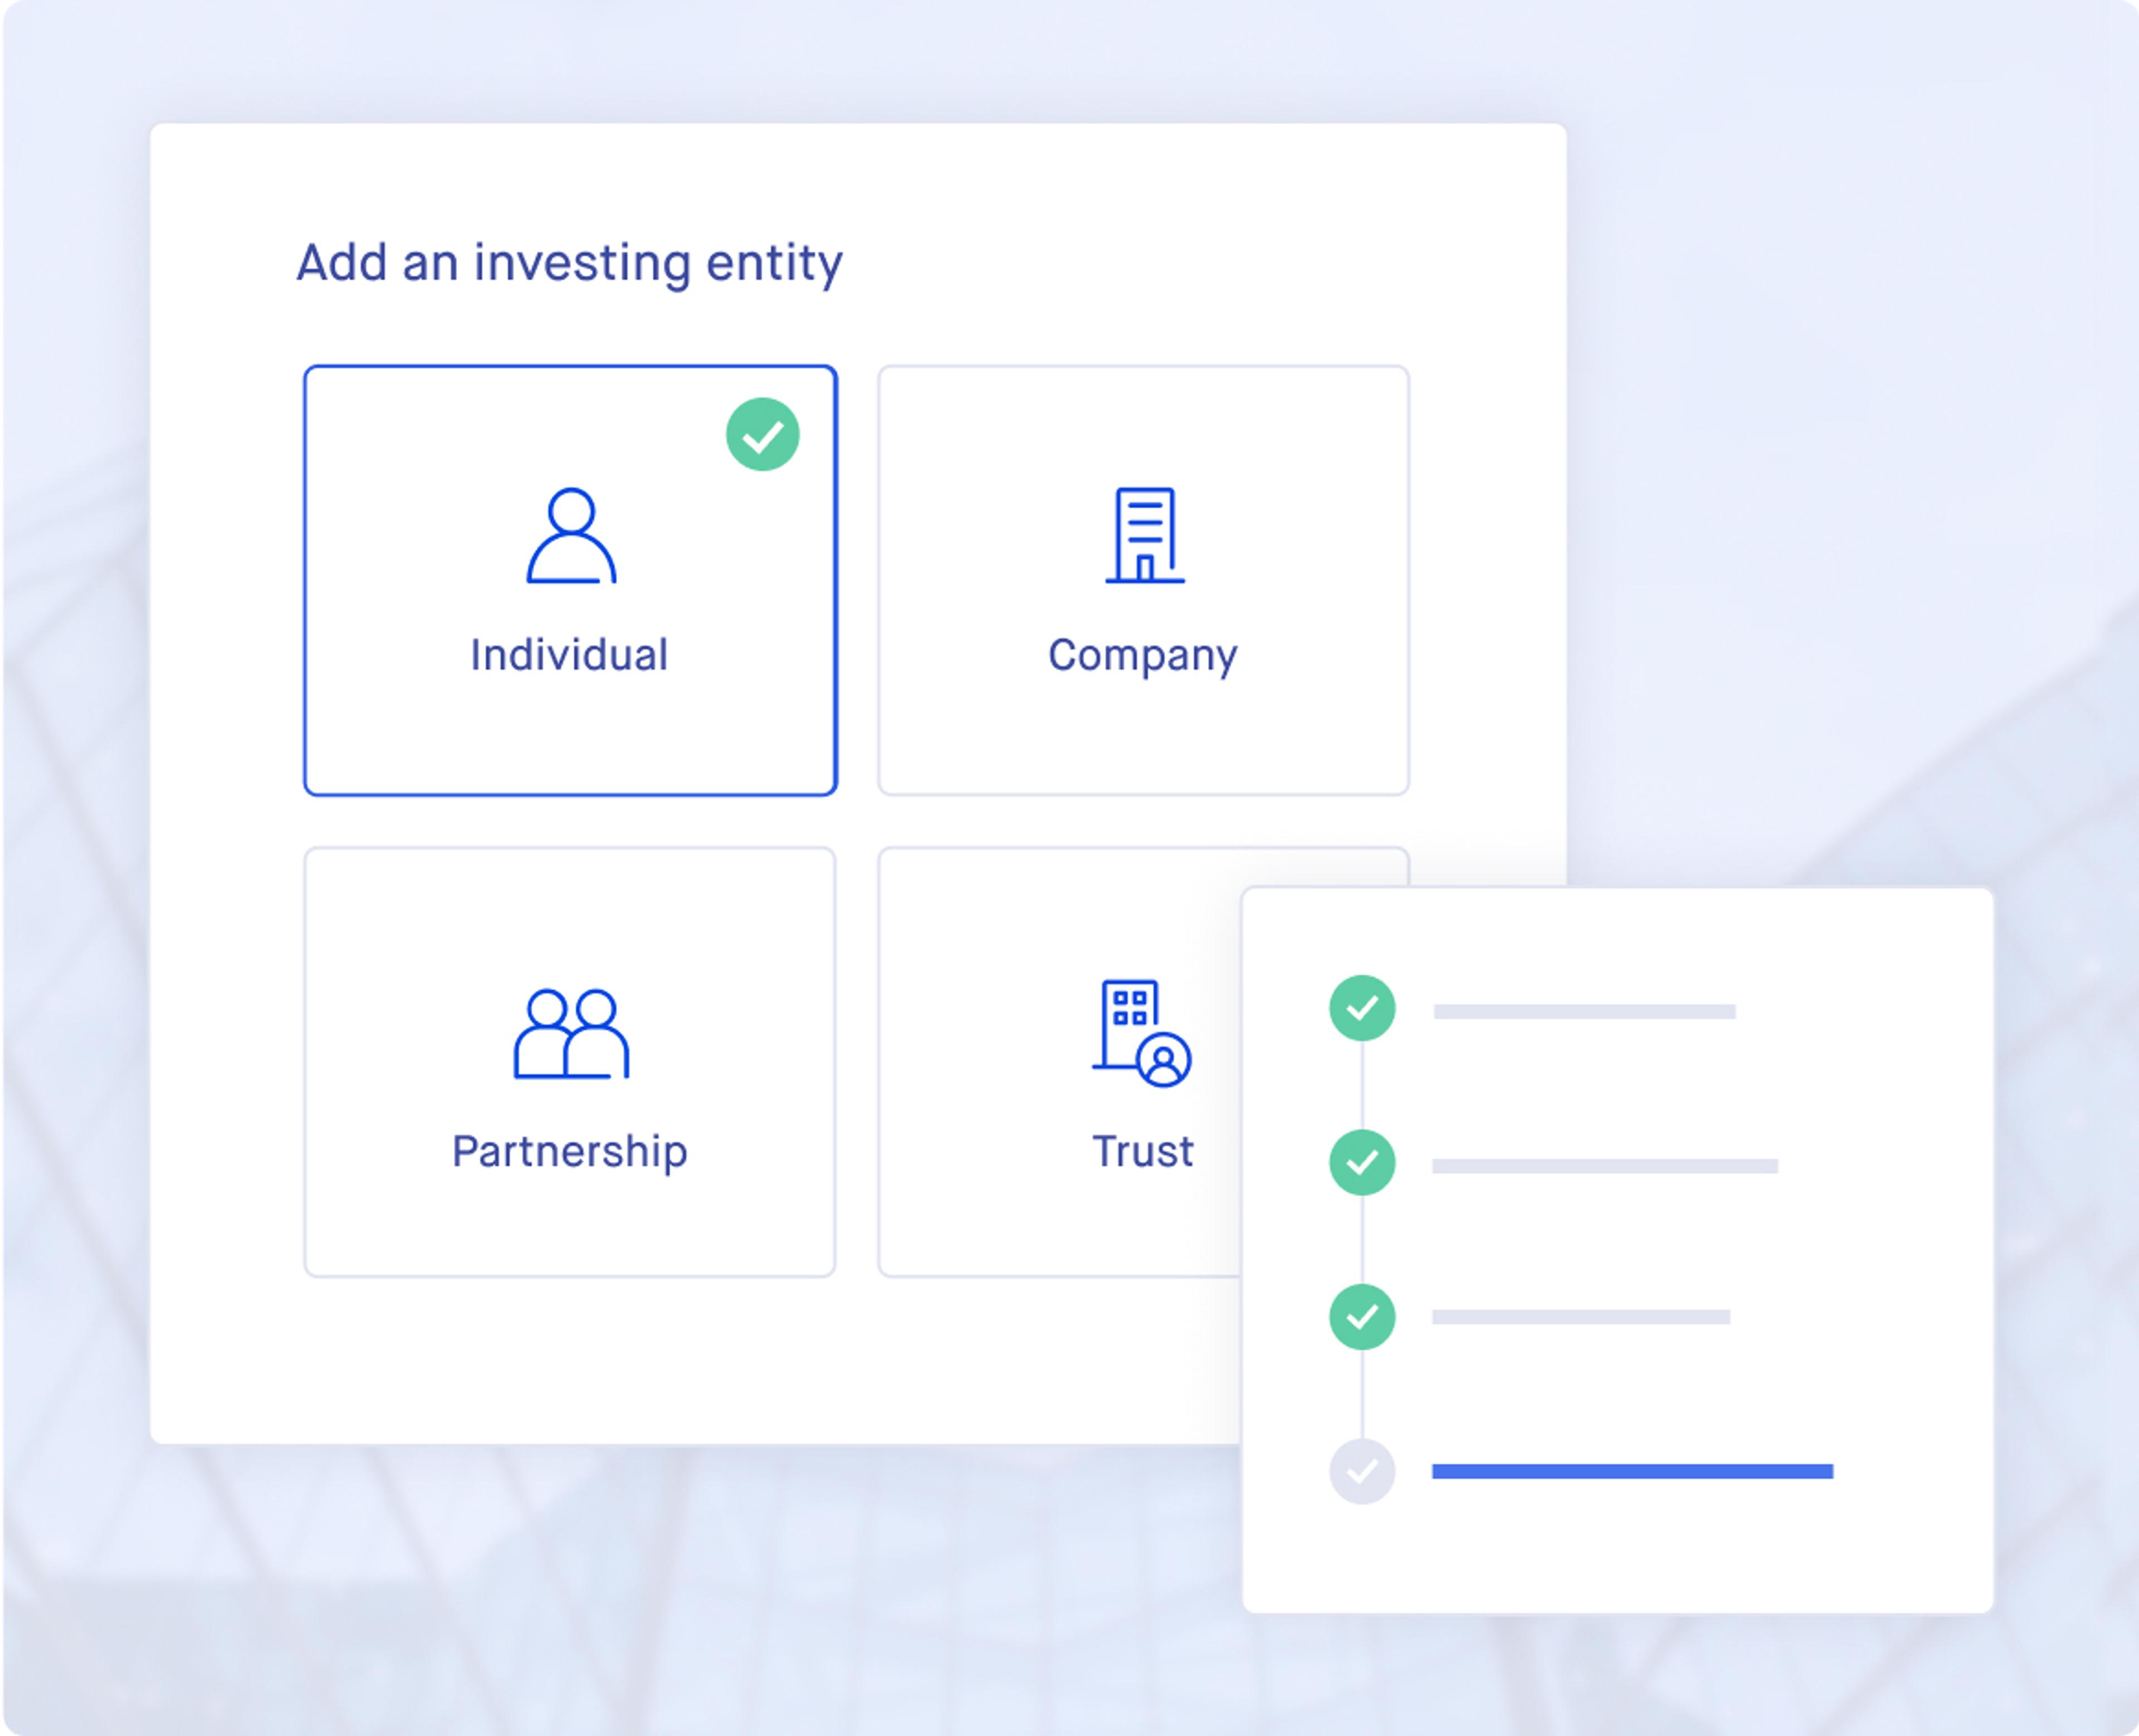 Jasper's fully digital onboarding and identity verification process lets you create an account and start investing quickly and easily.